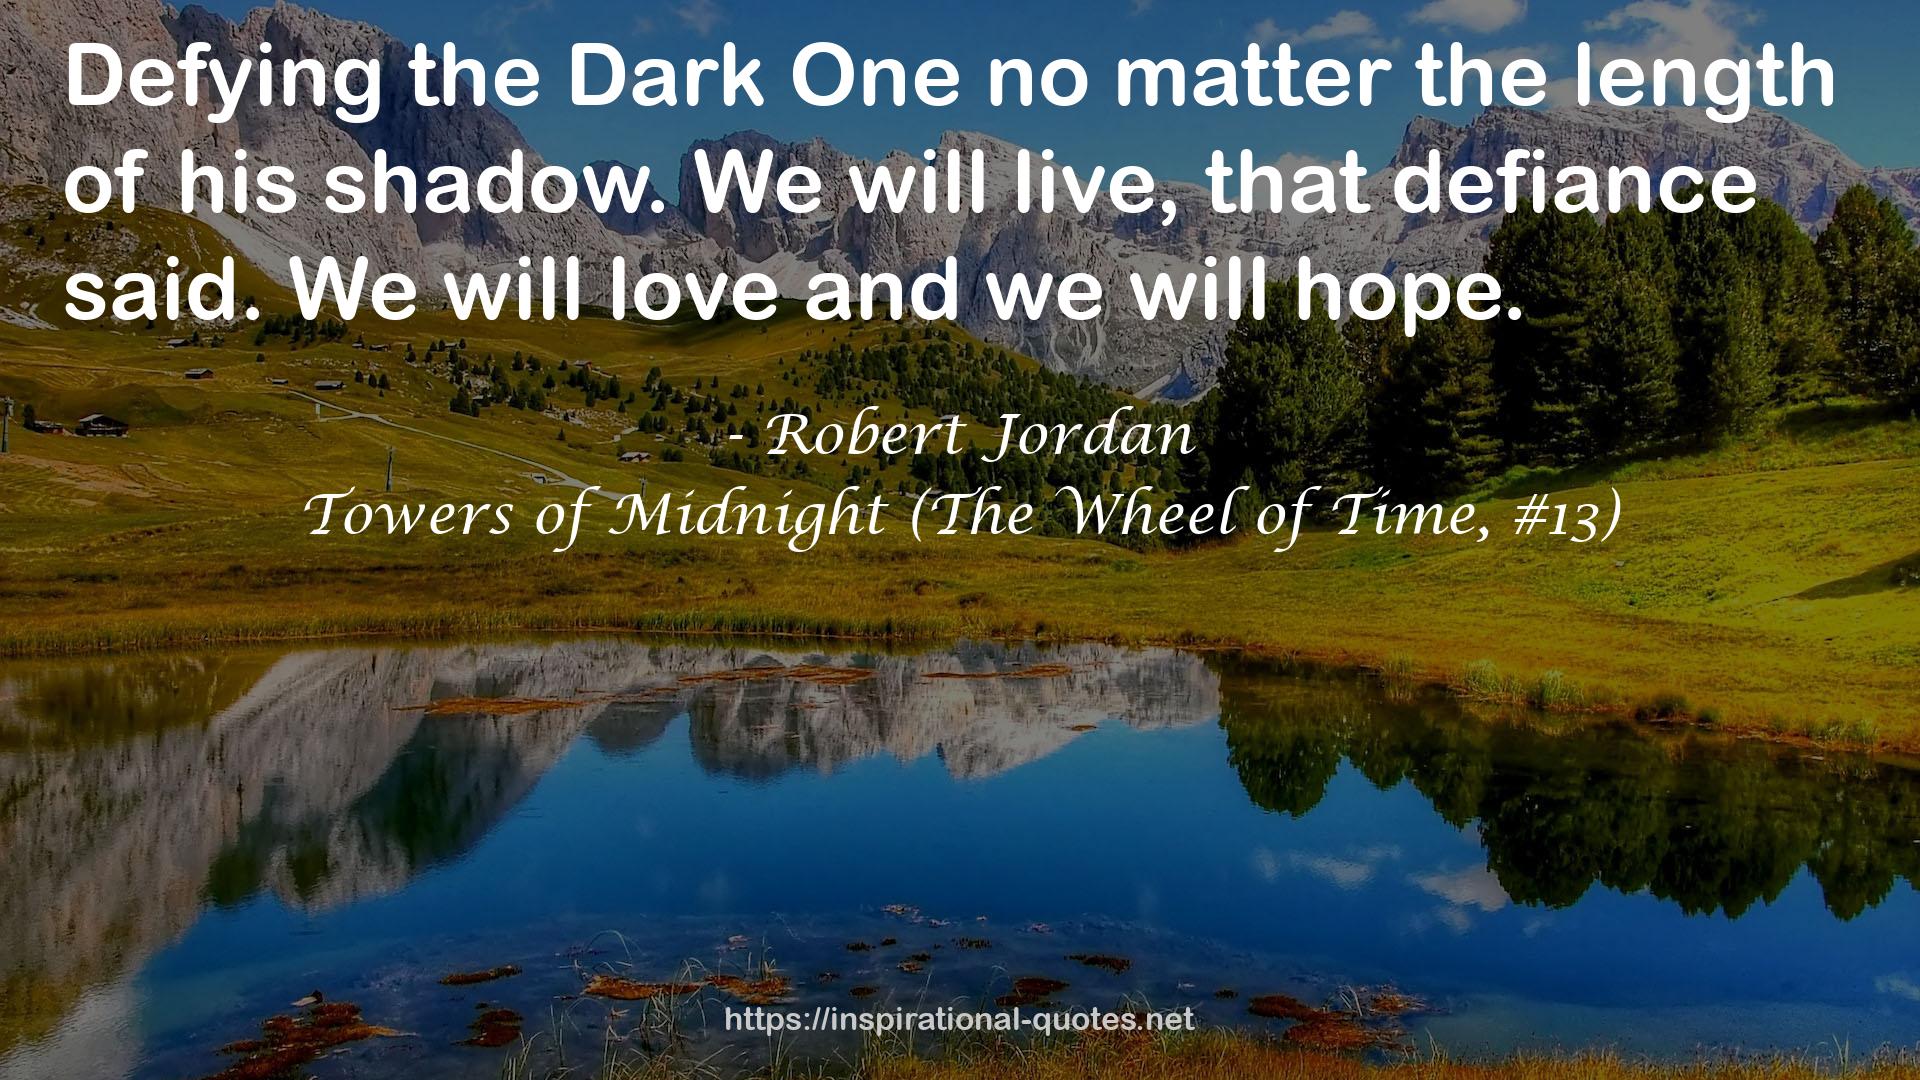 Towers of Midnight (The Wheel of Time, #13) QUOTES